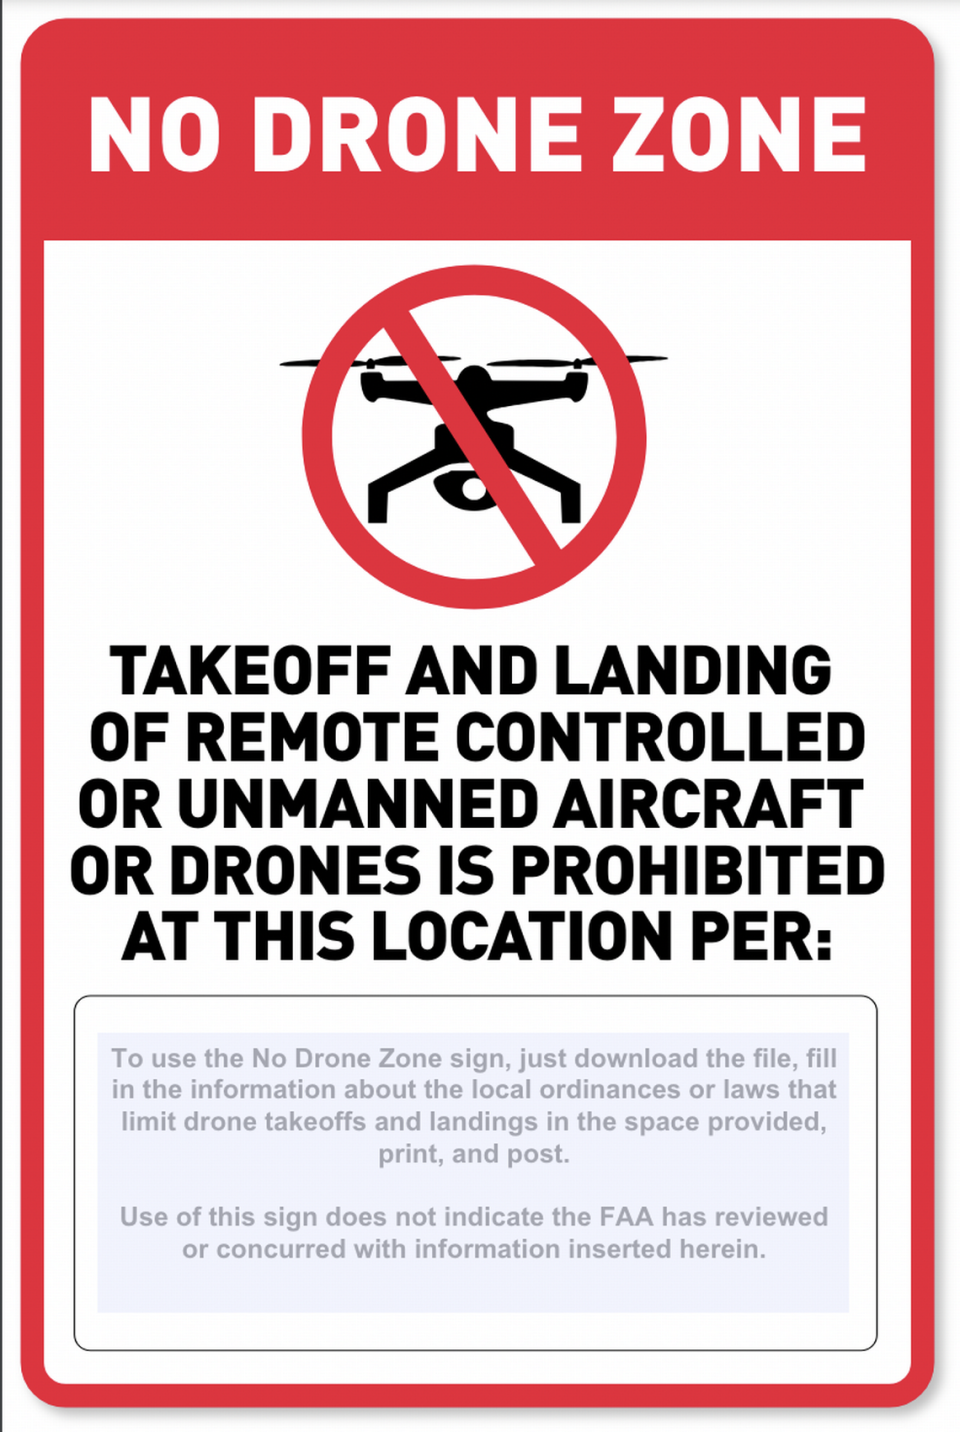 The Federal Aviation Administration created the No Drone Zone sign for government agencies to use to identify if there are local restrictions that prohibit taking off or landing drones from the designated area.